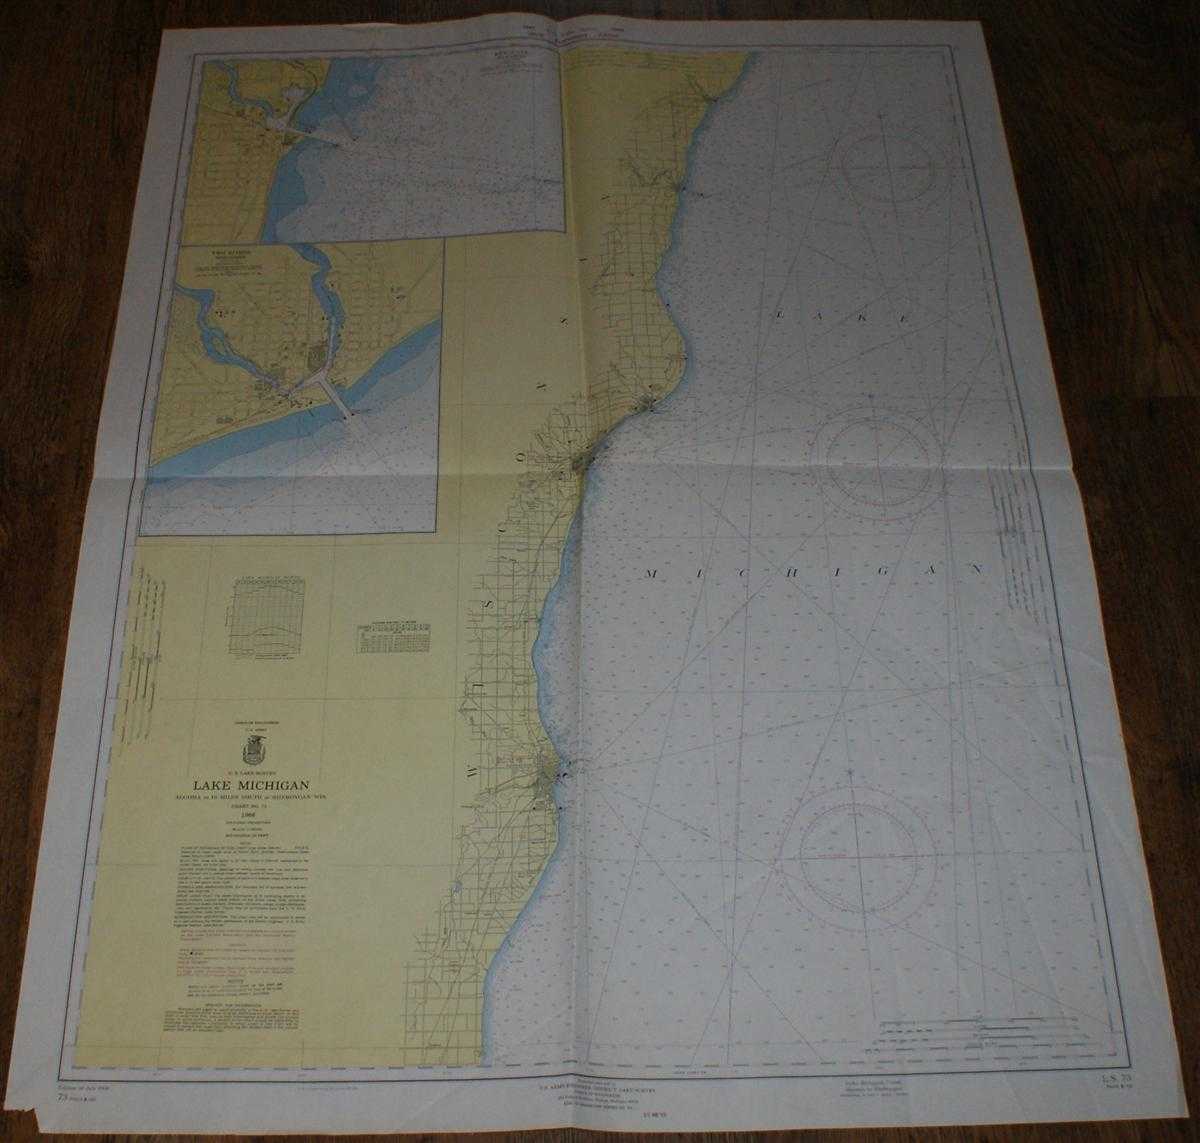 U.S Army, Corps of Engineers - Nautical Chart Lake Michigan No. L.S.73 Algoma to 18 miles south of Sheboygan, Wisconsin, Scale 1:20,000